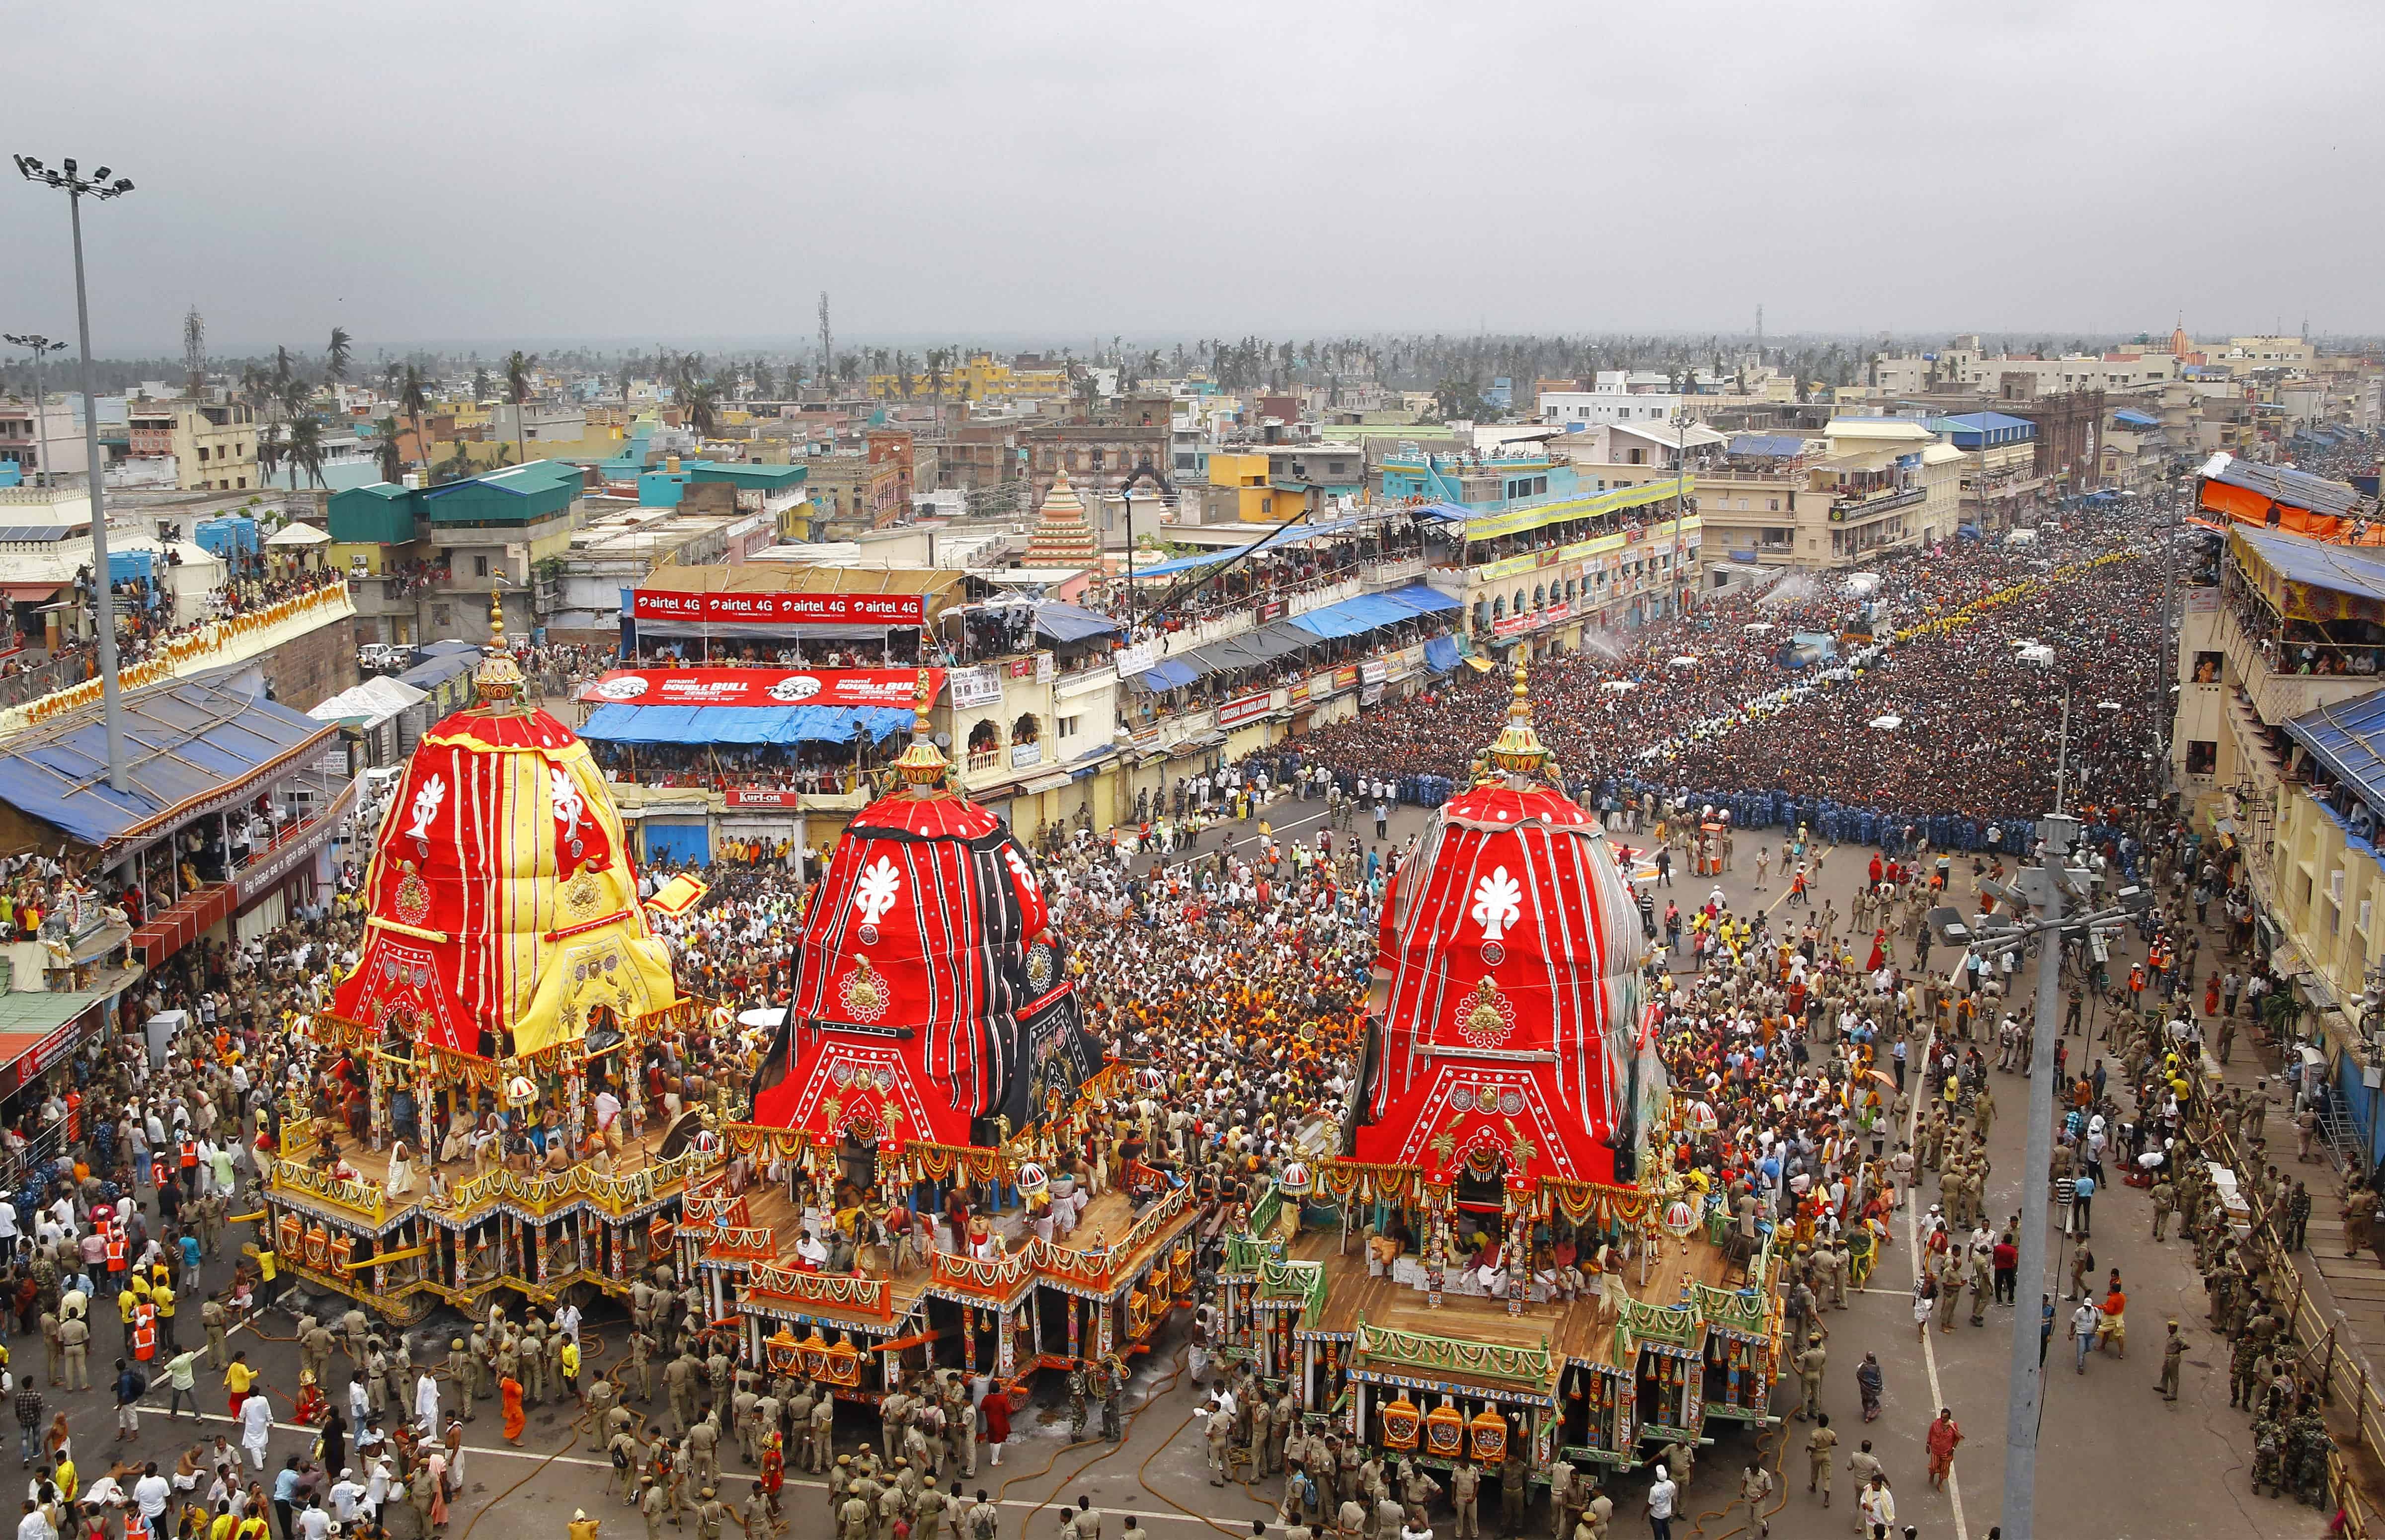 The Puri Rath Yatra is attended by lakhs of people from across the world and is scheduled from June 23. Credit: PTI Photo